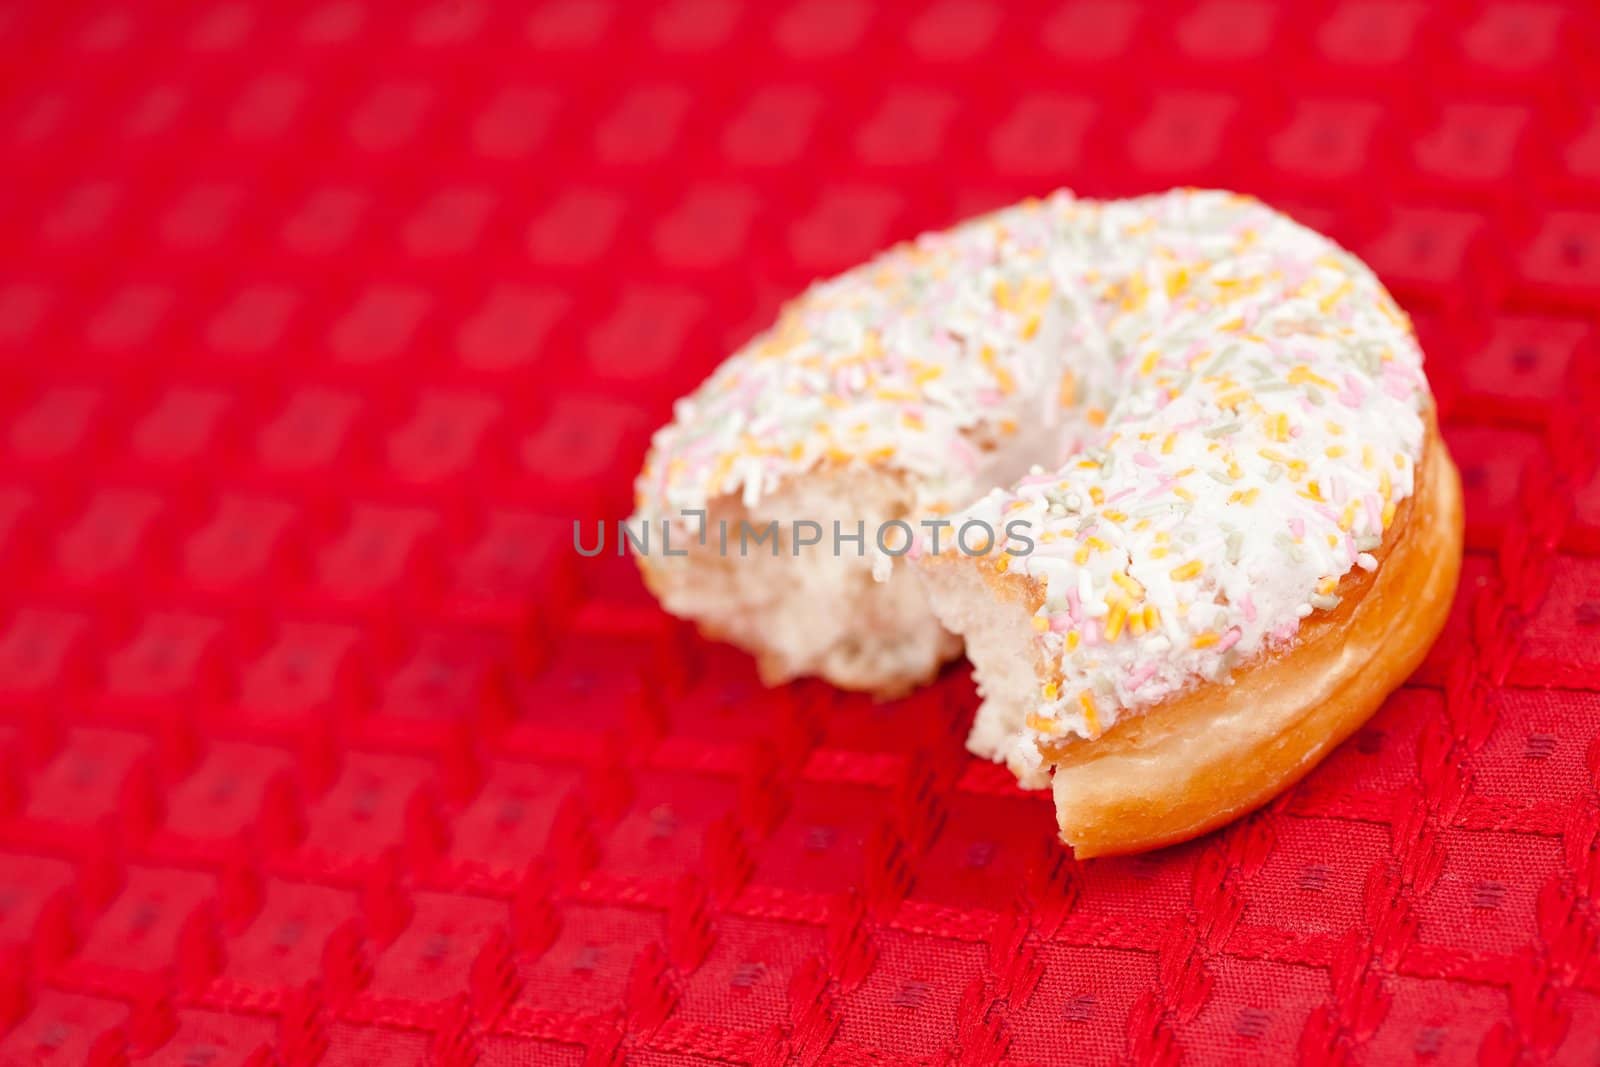 Half doughnut with whipped cream on a red tablecloth